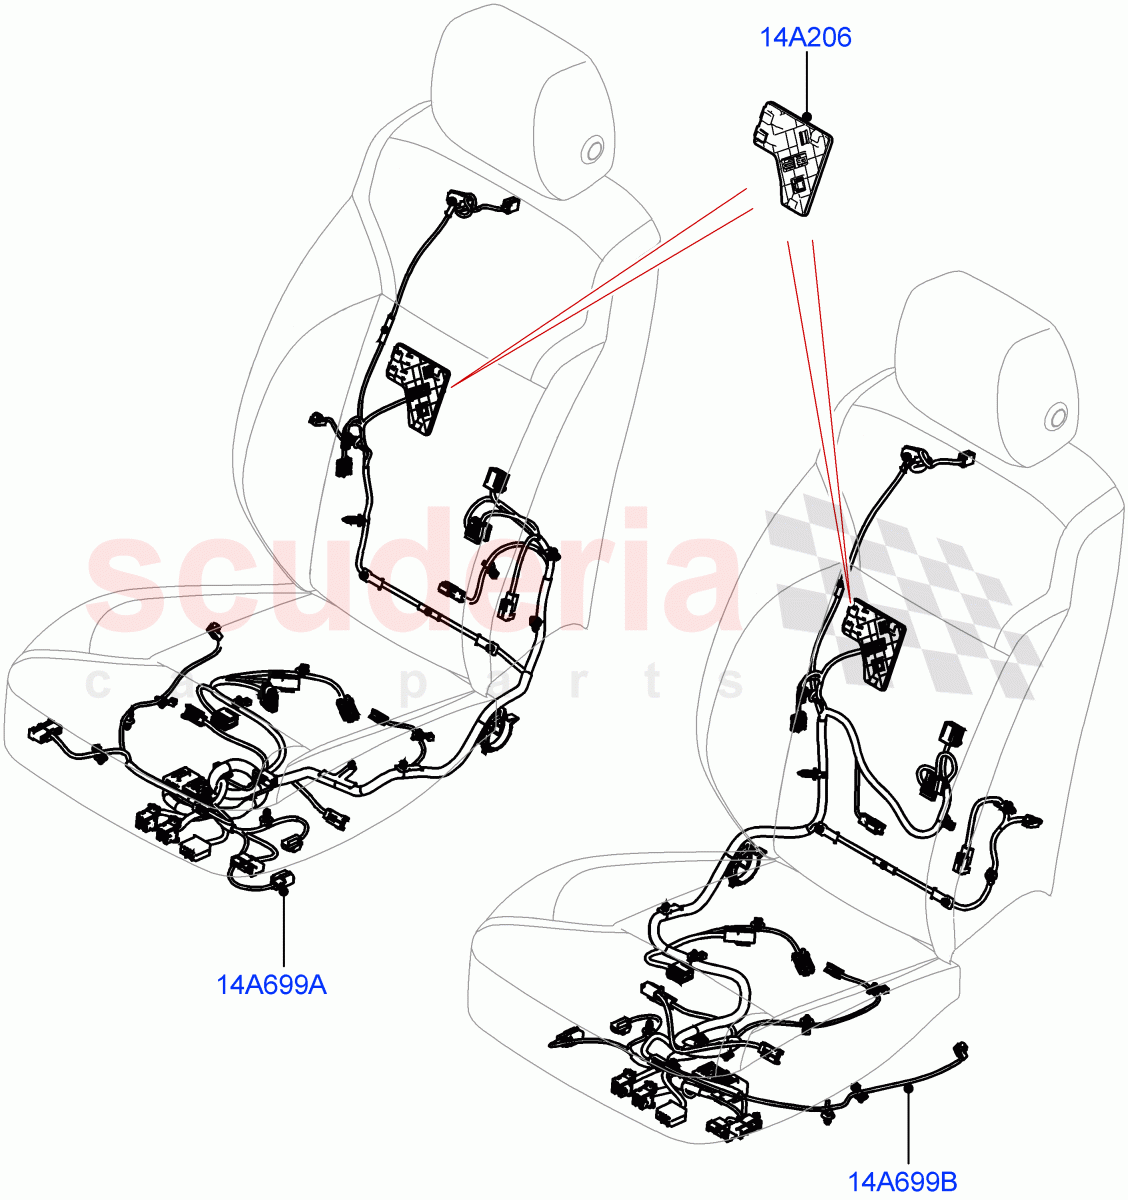 Wiring - Seats(Front Seats)((V)FROMMA000001) of Land Rover Land Rover Range Rover Velar (2017+) [2.0 Turbo Petrol AJ200P]